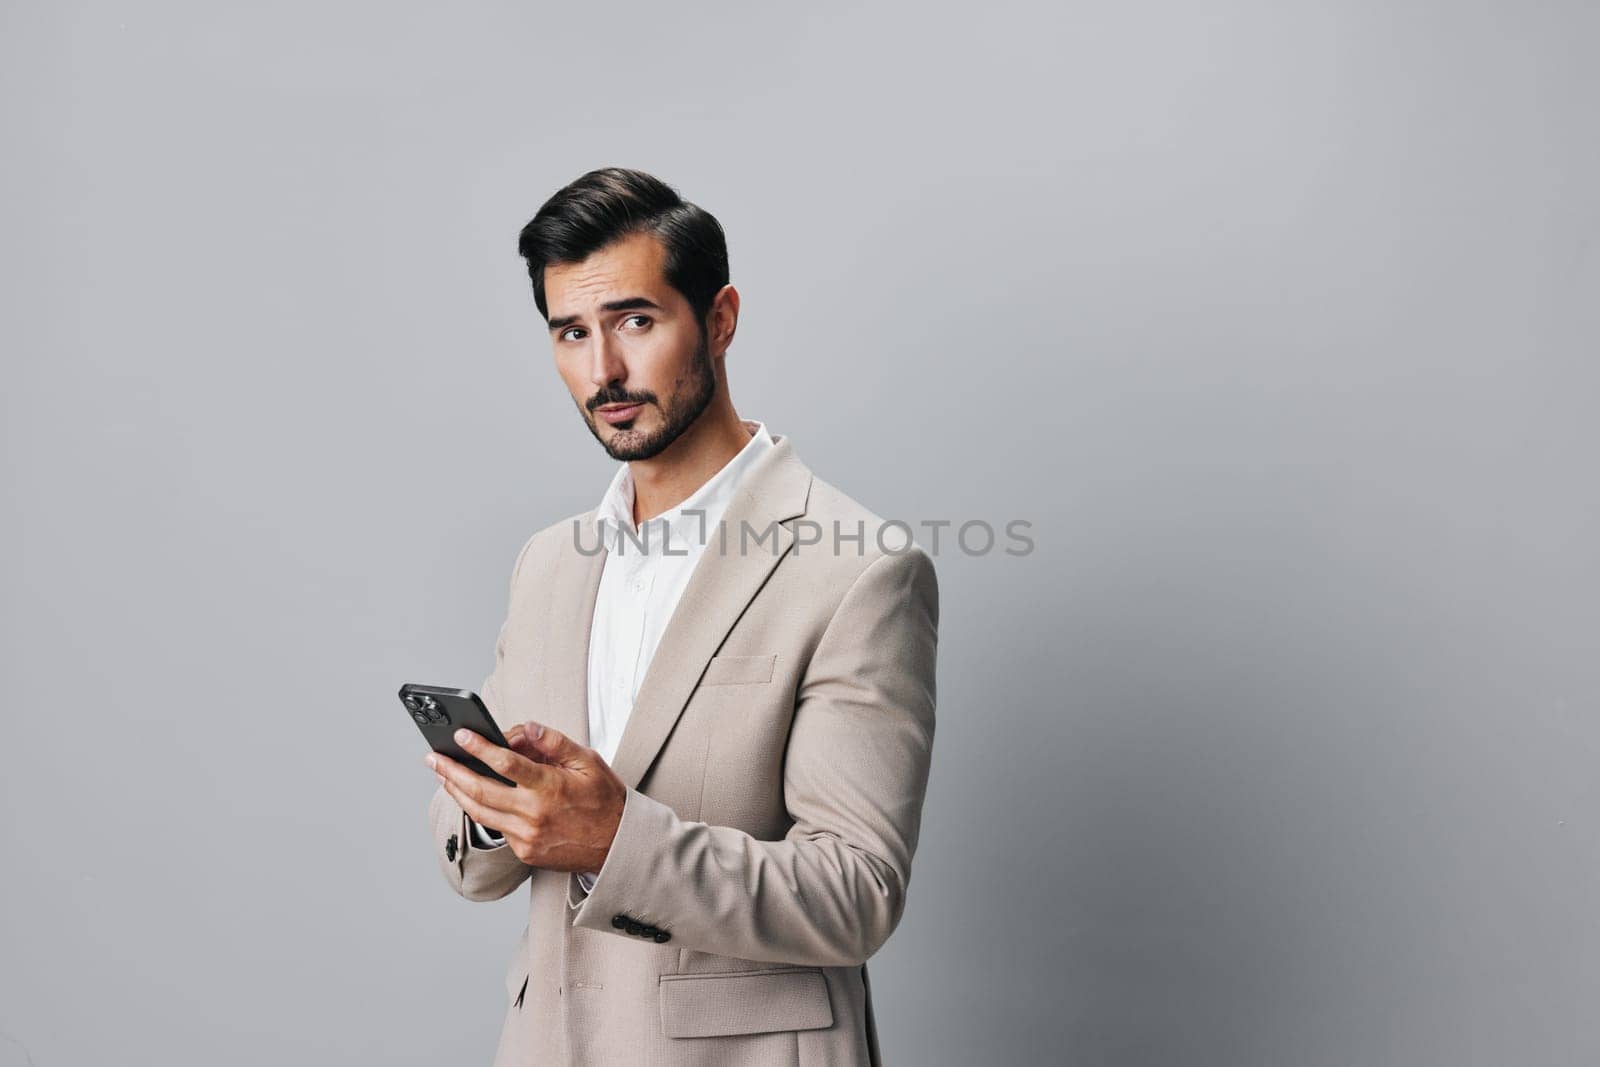 lifestyle man studio phone white suit connection hold holding business portrait space smartphone adult smile copy trading call background online businessman happy